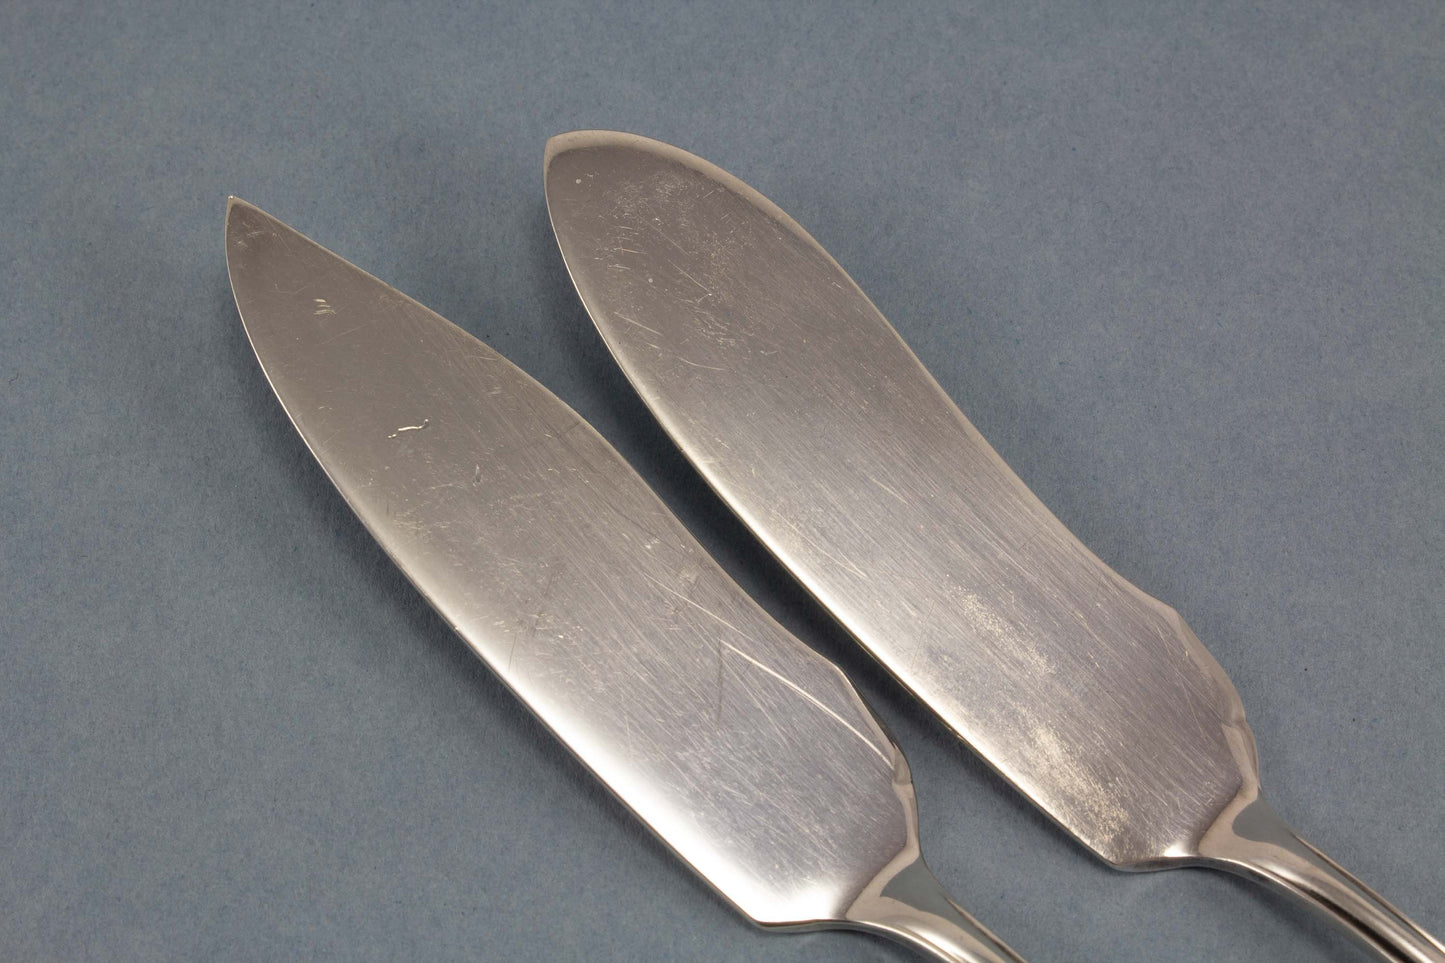 Silver plated cheese knife and butter knife, WMF 2100 Chippendale